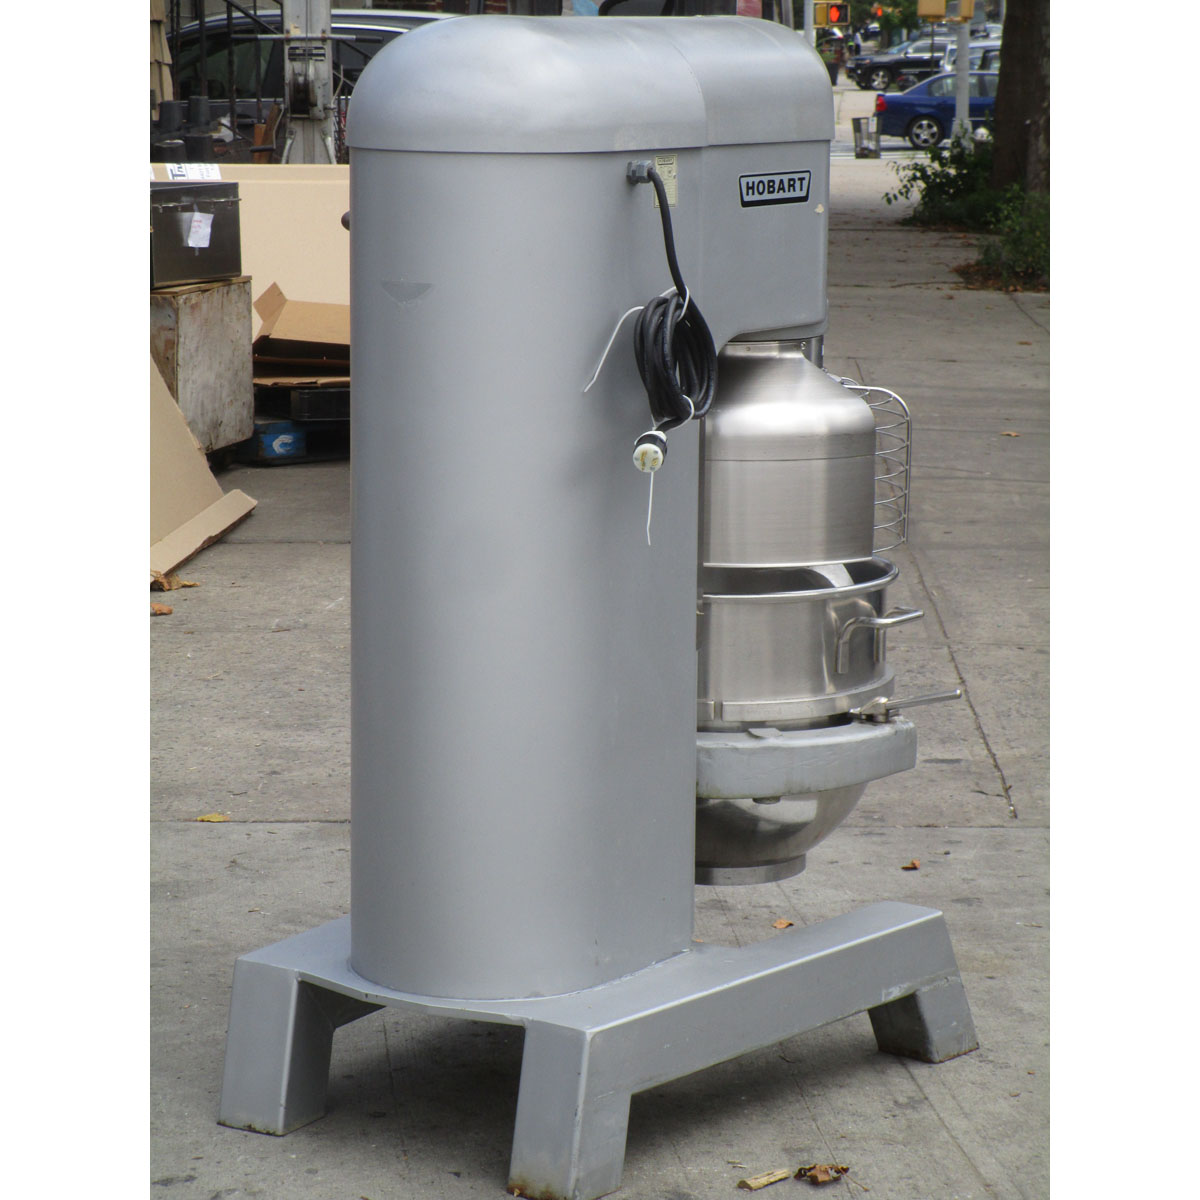 Hoabrt 60 Quart H600 Mixer With Bowl Gaurd, Great Condition image 2